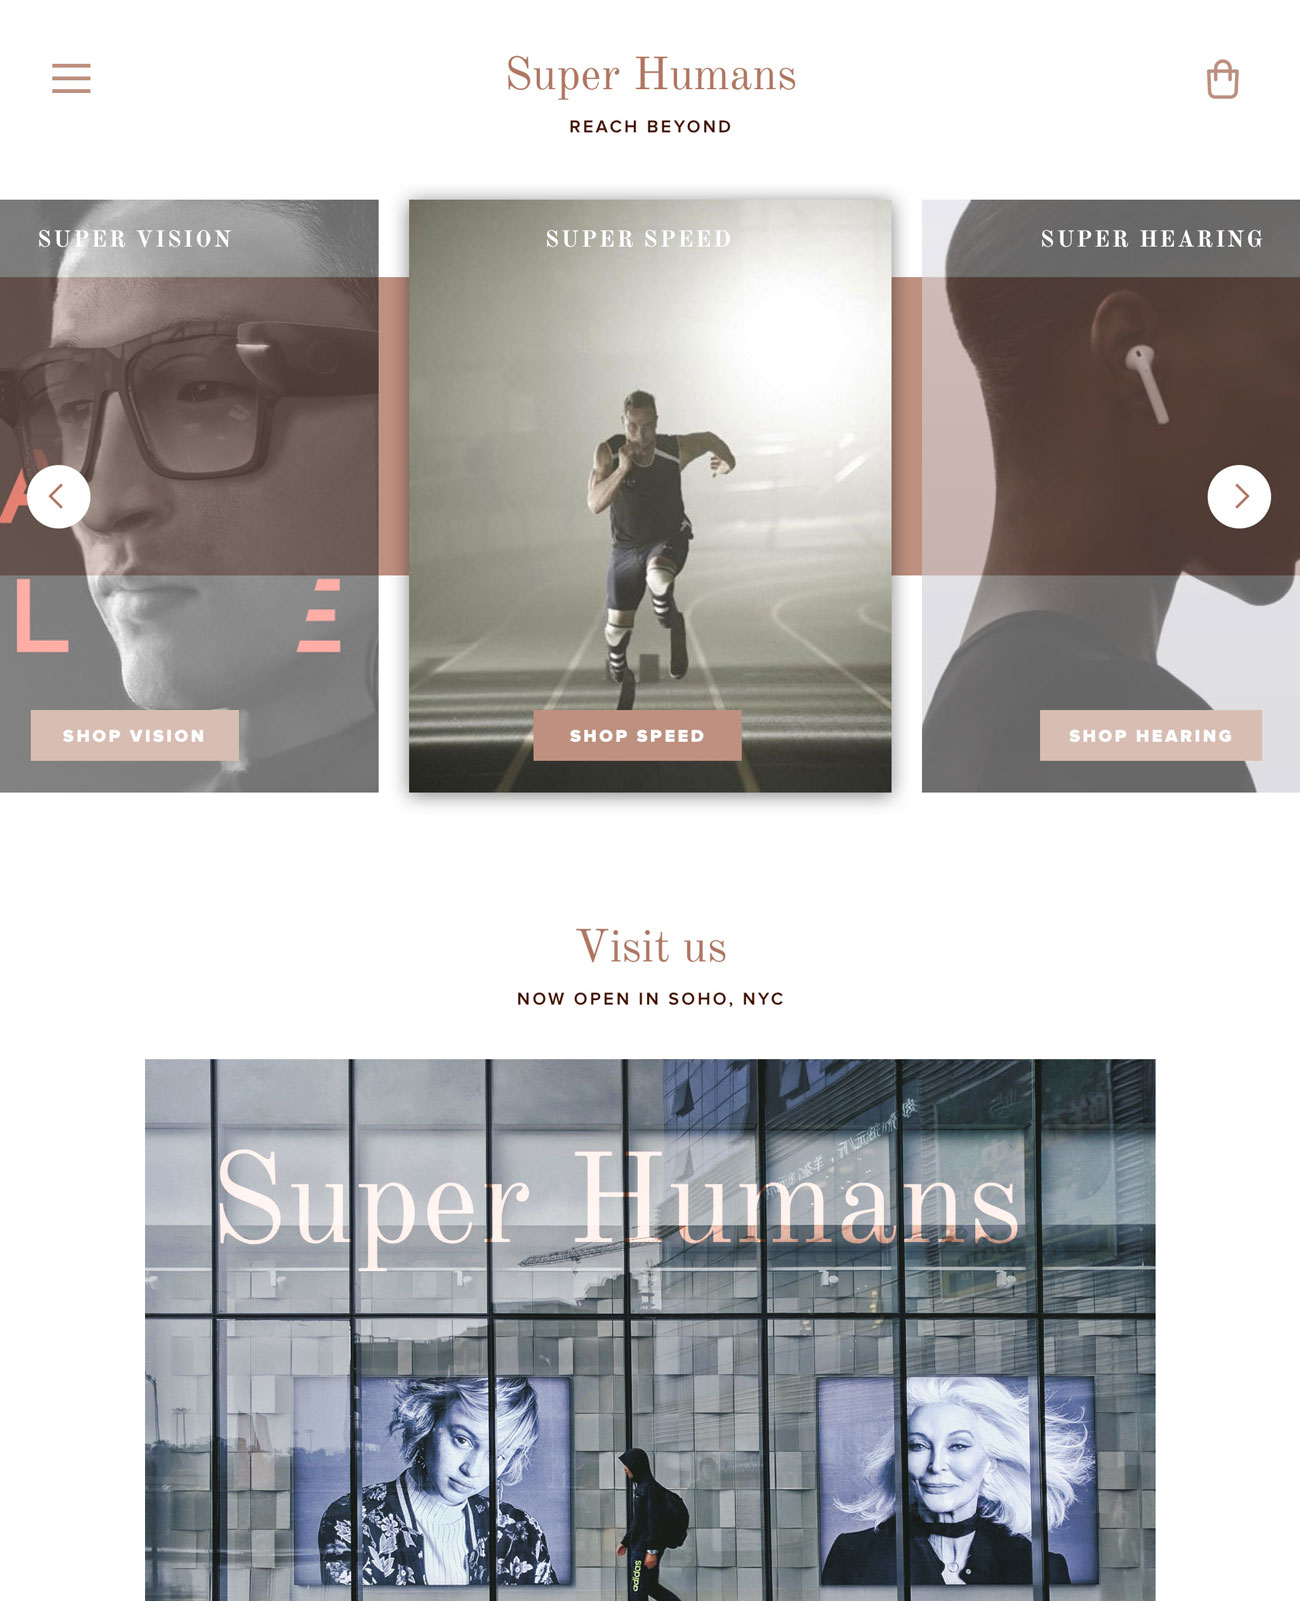 A mockup of the Super Humans site